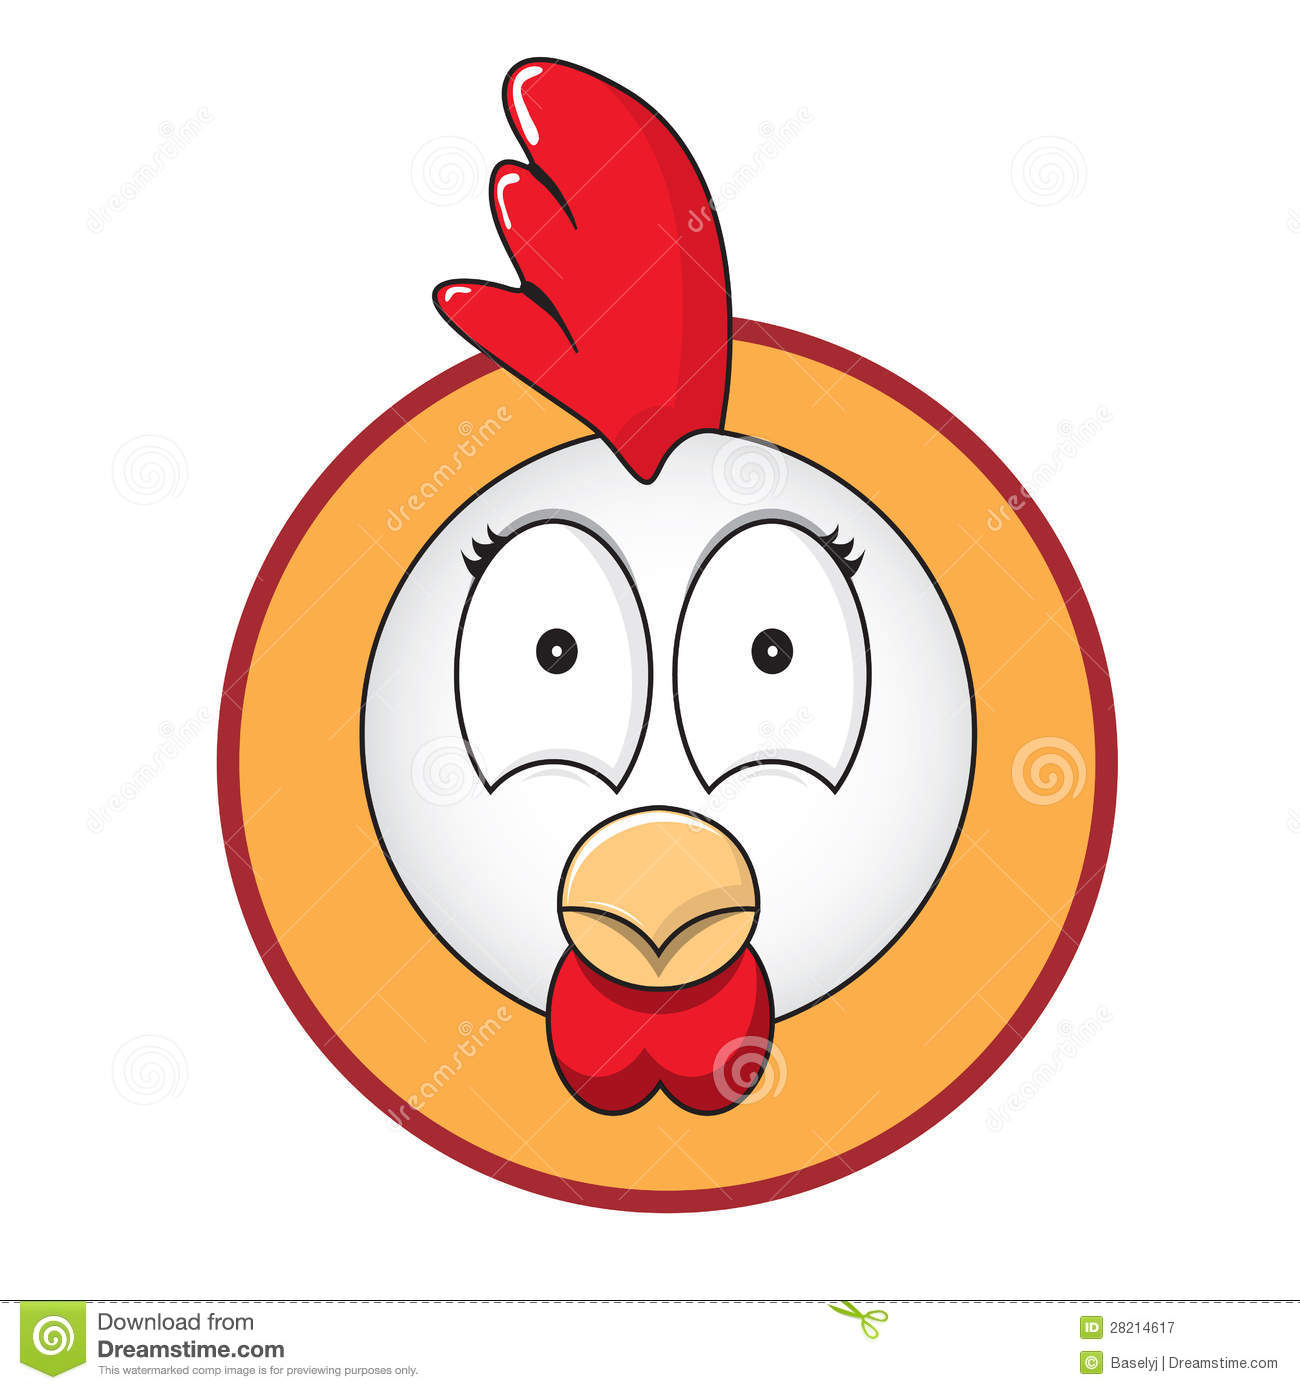 Chicken Head Button Royalty Free Stock Photography   Image  28214617